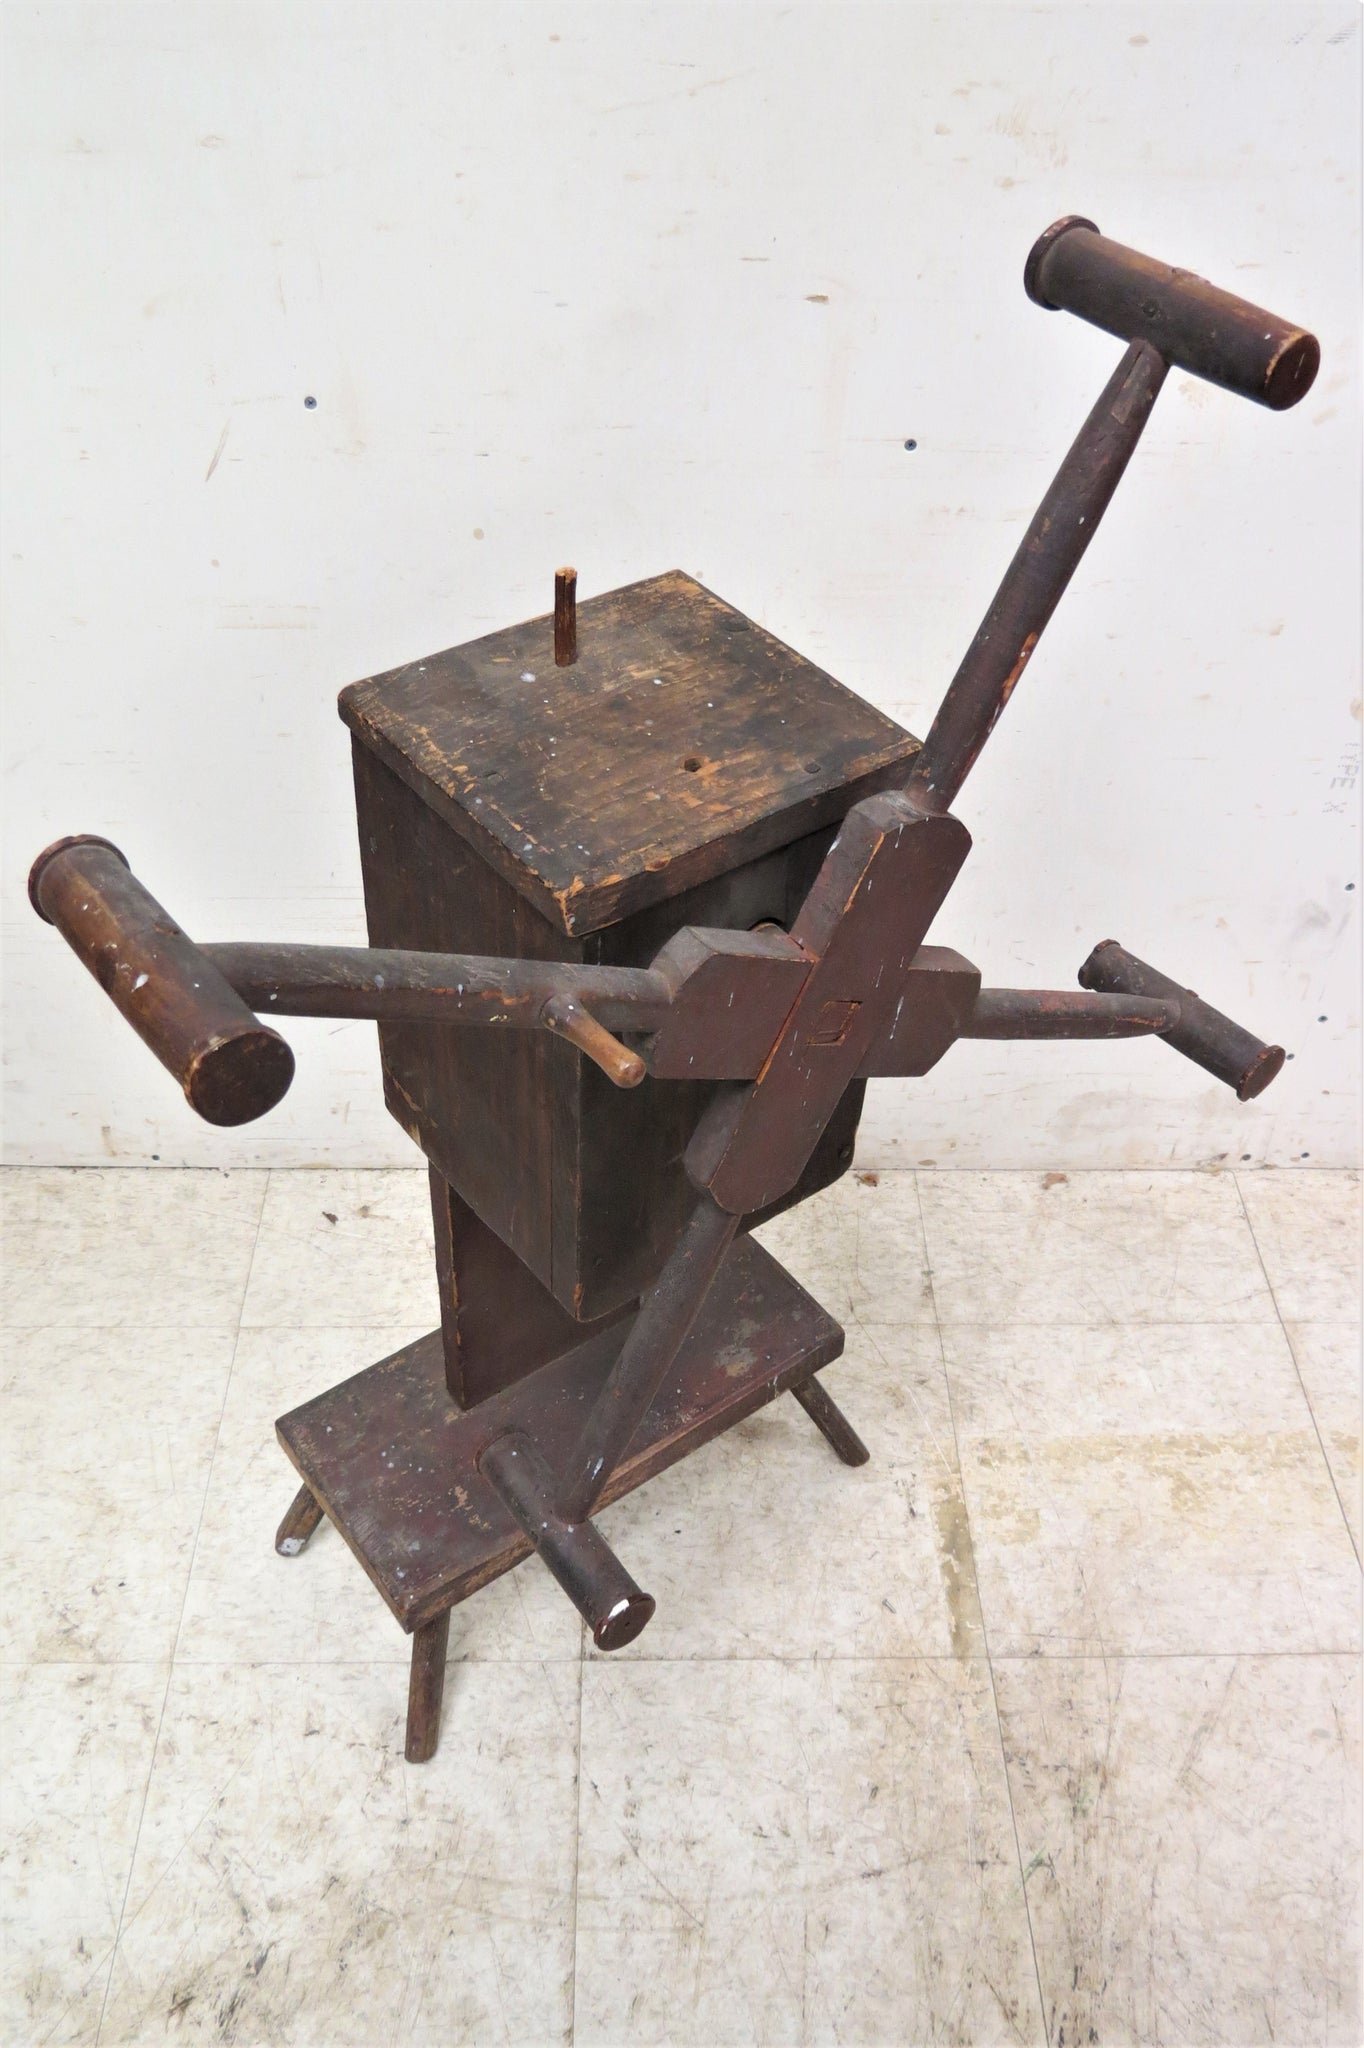 Sold at Auction: An antique wooden yarn winder. 36 1/2 x 27 x 10 in. (92.7  x 68.5 x 25.4 cm)